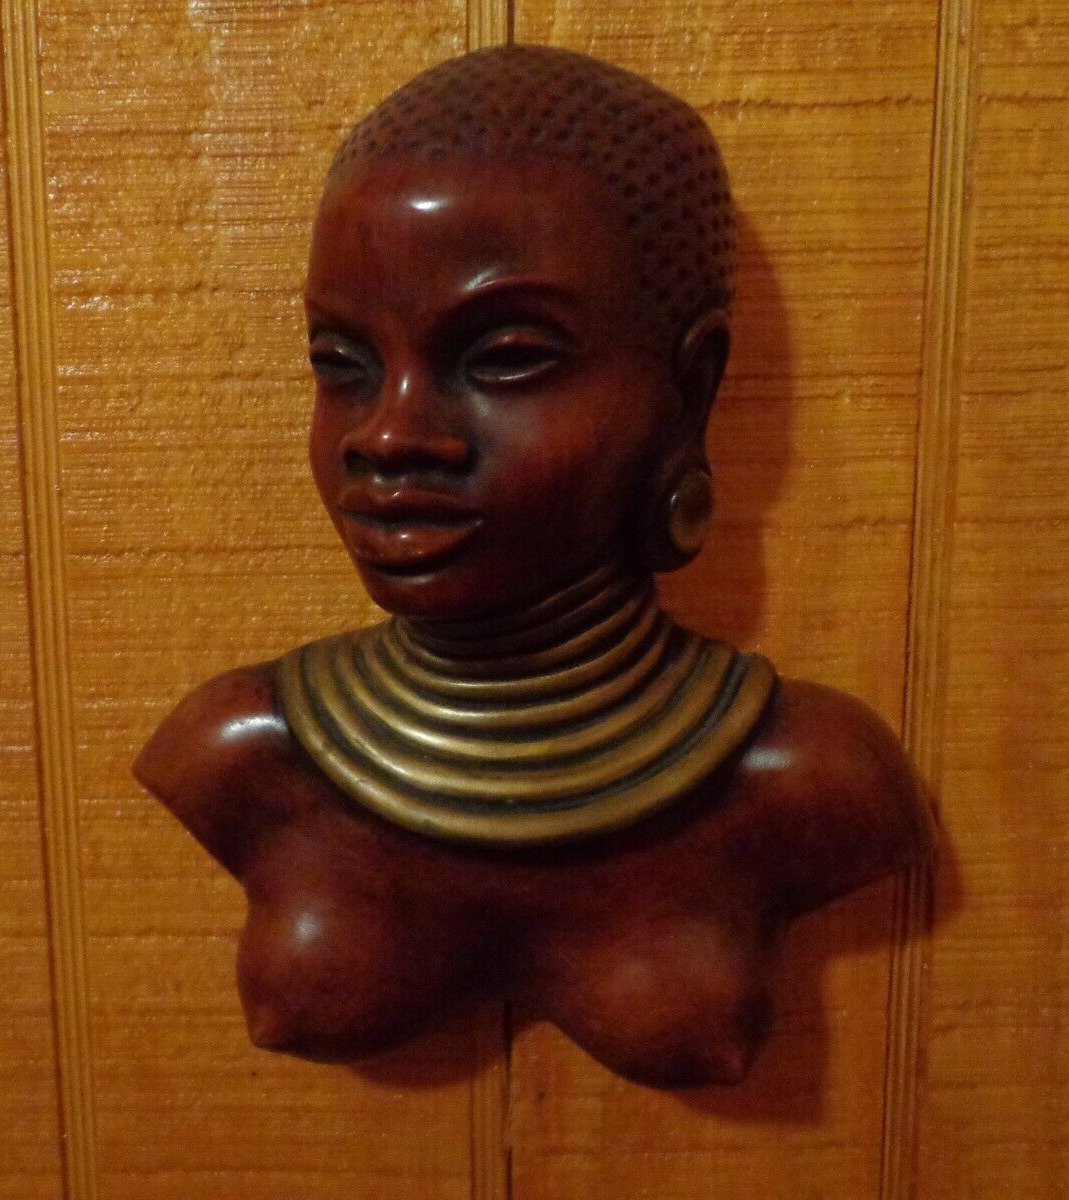 Vintage Ndebele Woman Bust Figurine With Neck Ring, ACHATIT Wall Hanging Art